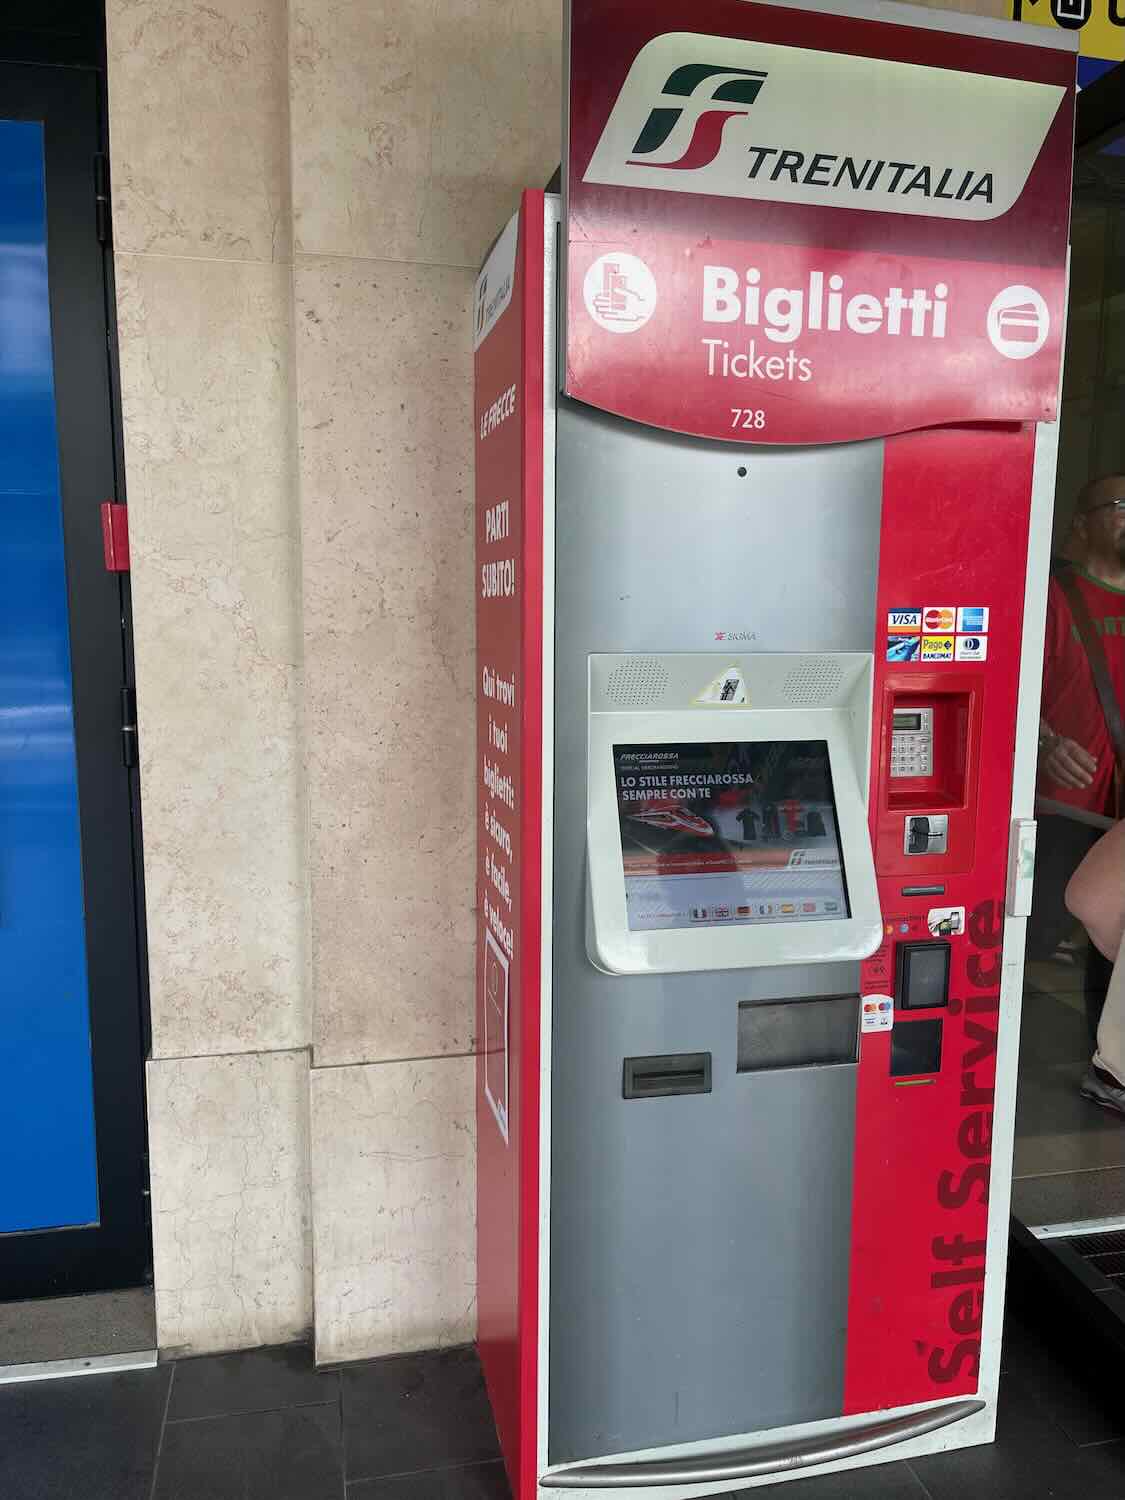 A photo of a Trenitalia ticket machine in Bari, Italy. The machine is red and grey with a touchscreen interface and various payment options displayed. It is located against a stone wall, with signage indicating 'Biglietti' (Tickets) and 'Self Service'.